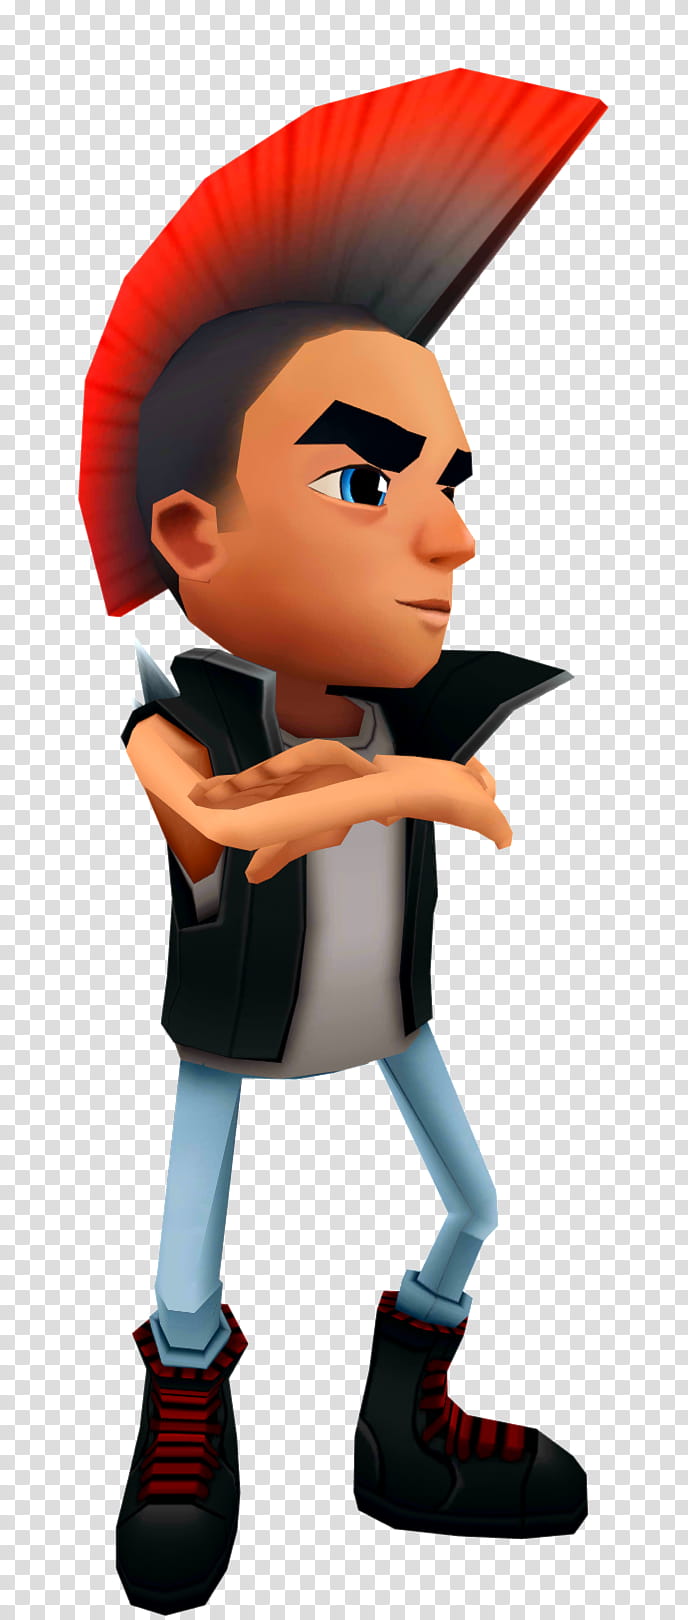 Running, Subway Surfers, Character, Video Games, Endless Running, Player Character, Moral Character, Cartoon transparent background PNG clipart